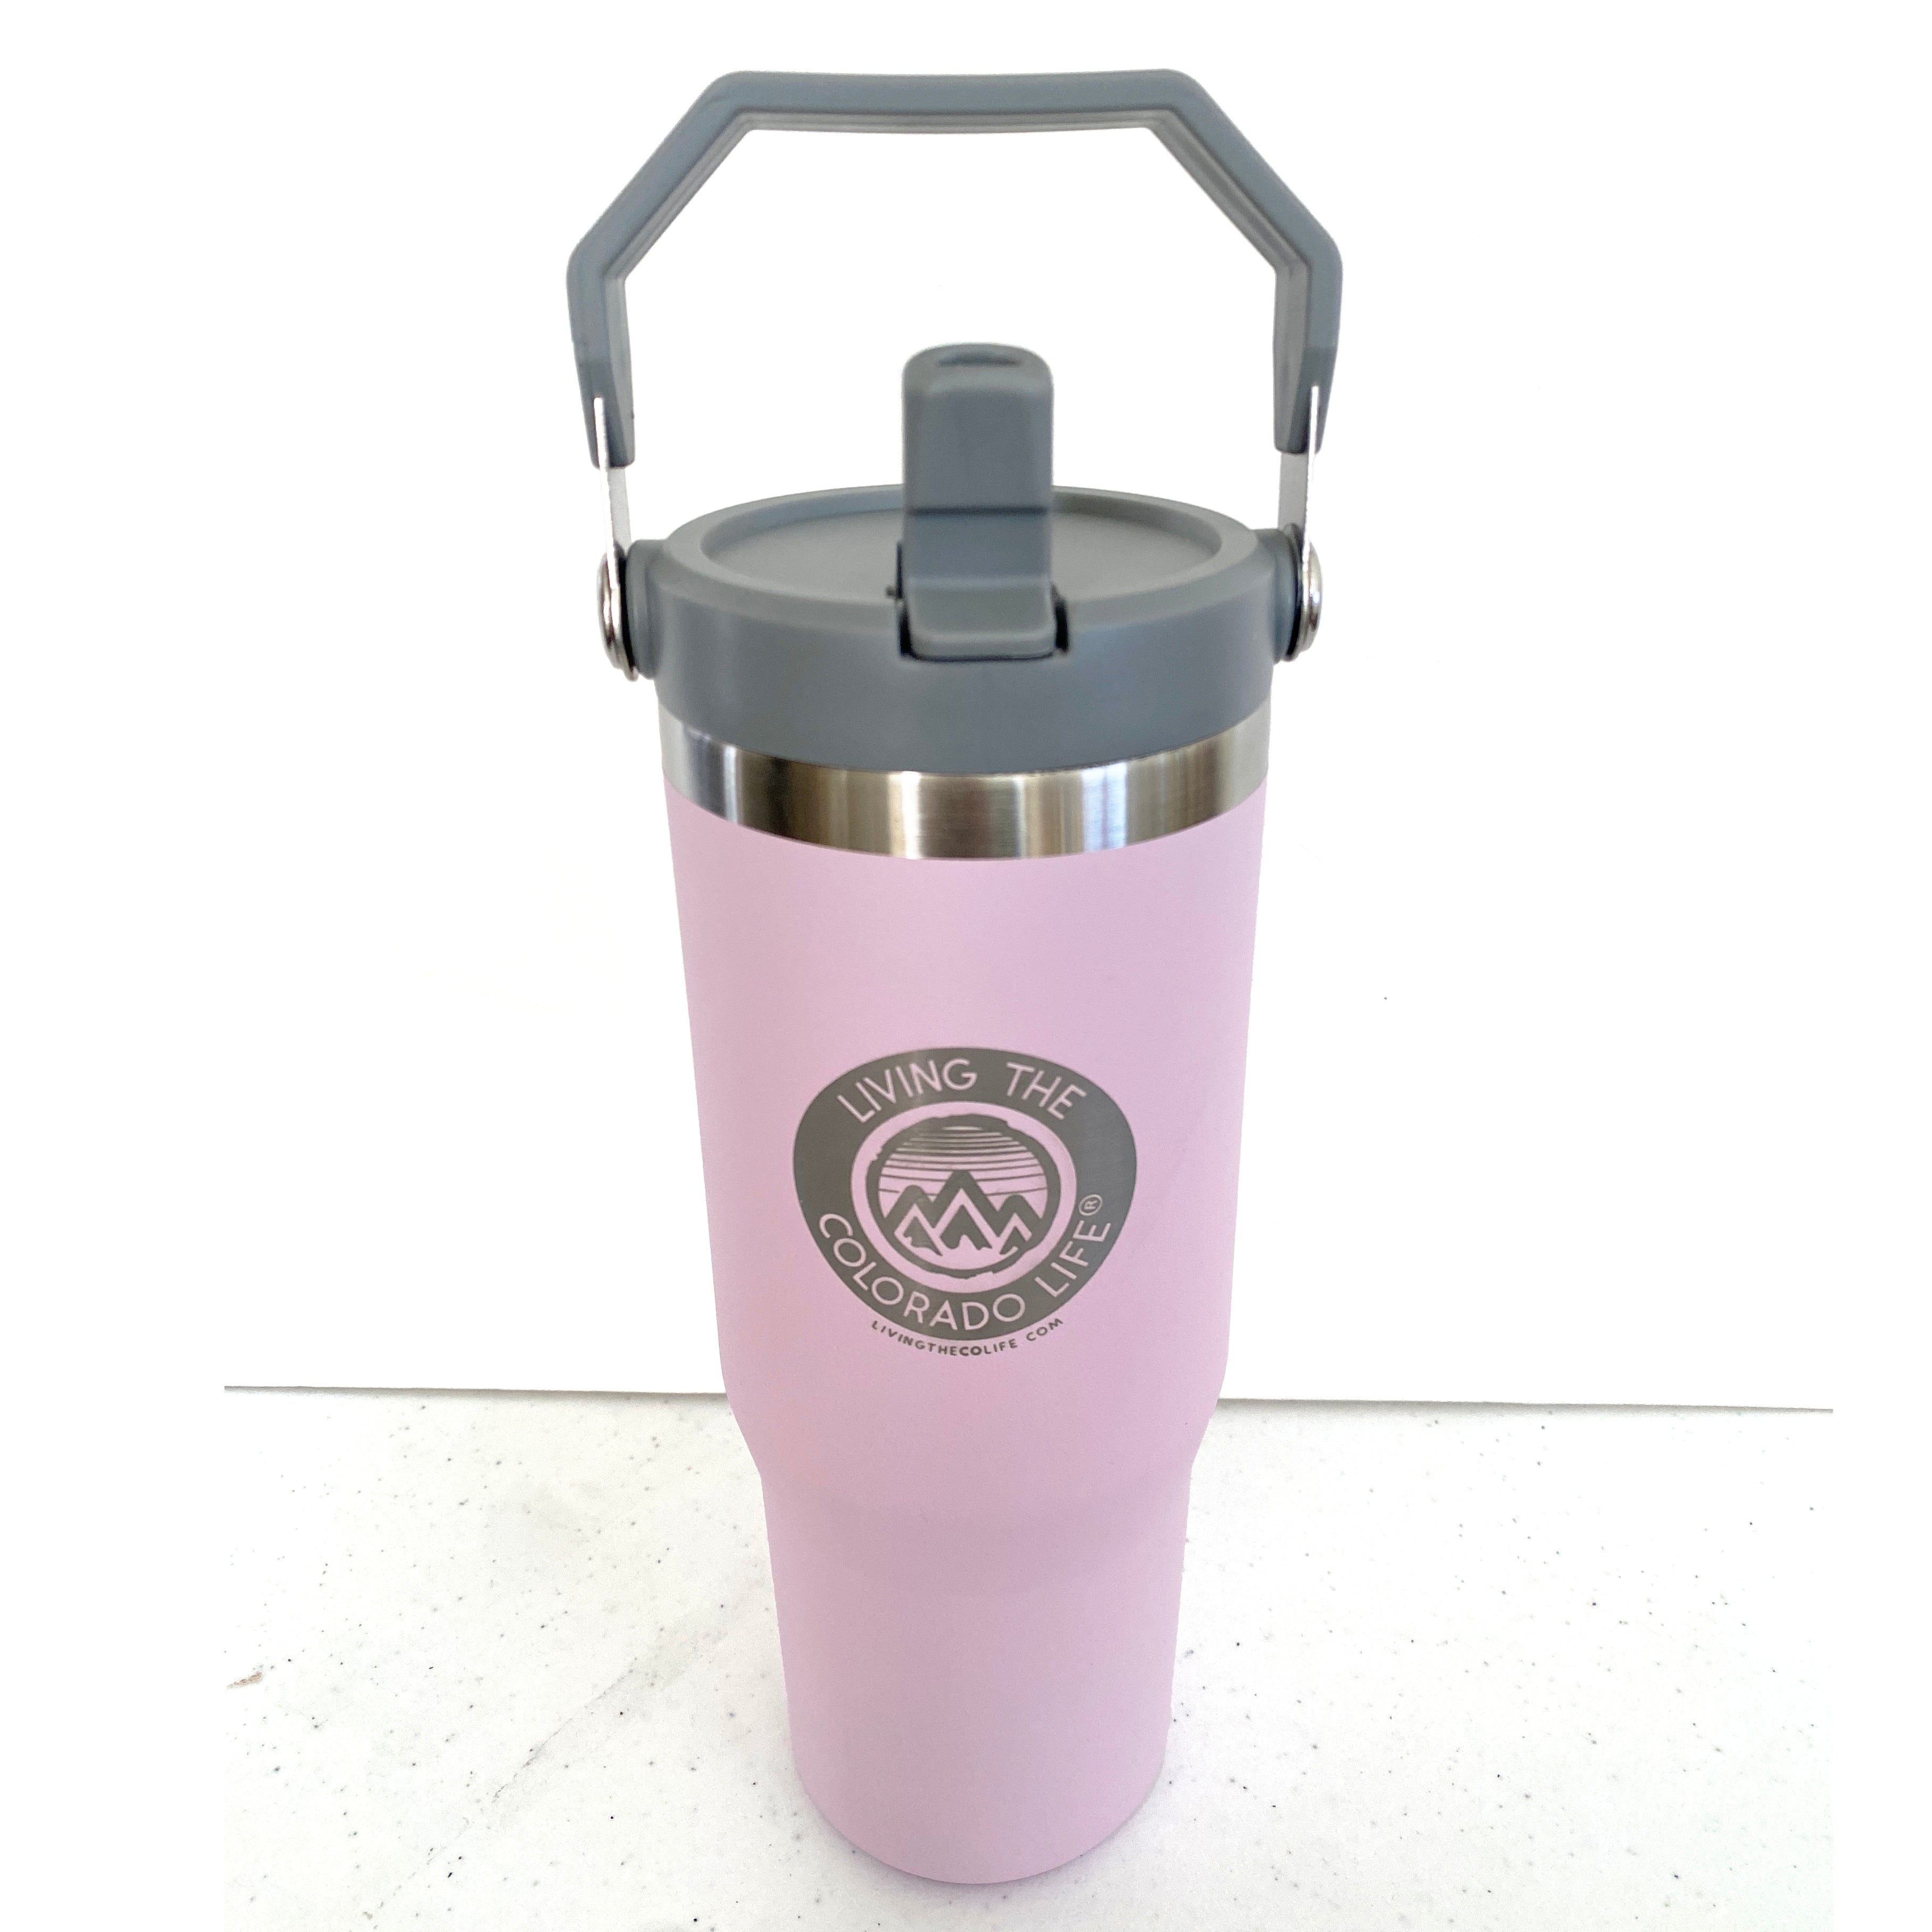 RecPro 30oz Handle for Stainless Steel Tumbler Pink - RecPro